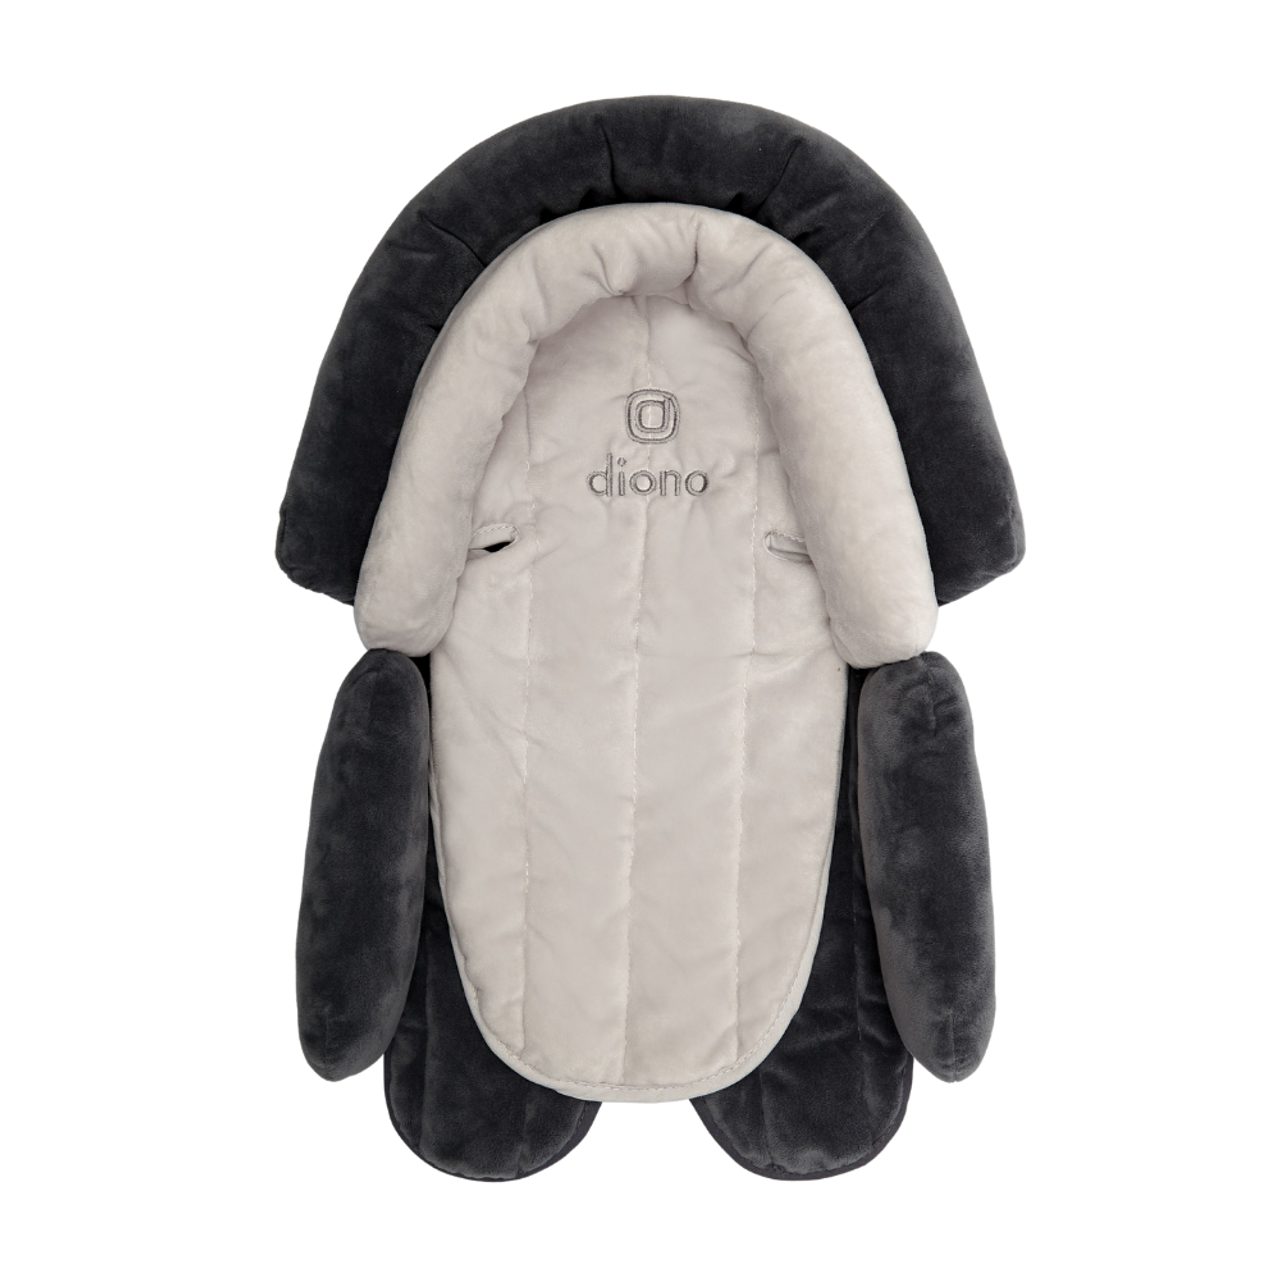 Cuddle Soft® 2-in-1 Baby Head Support